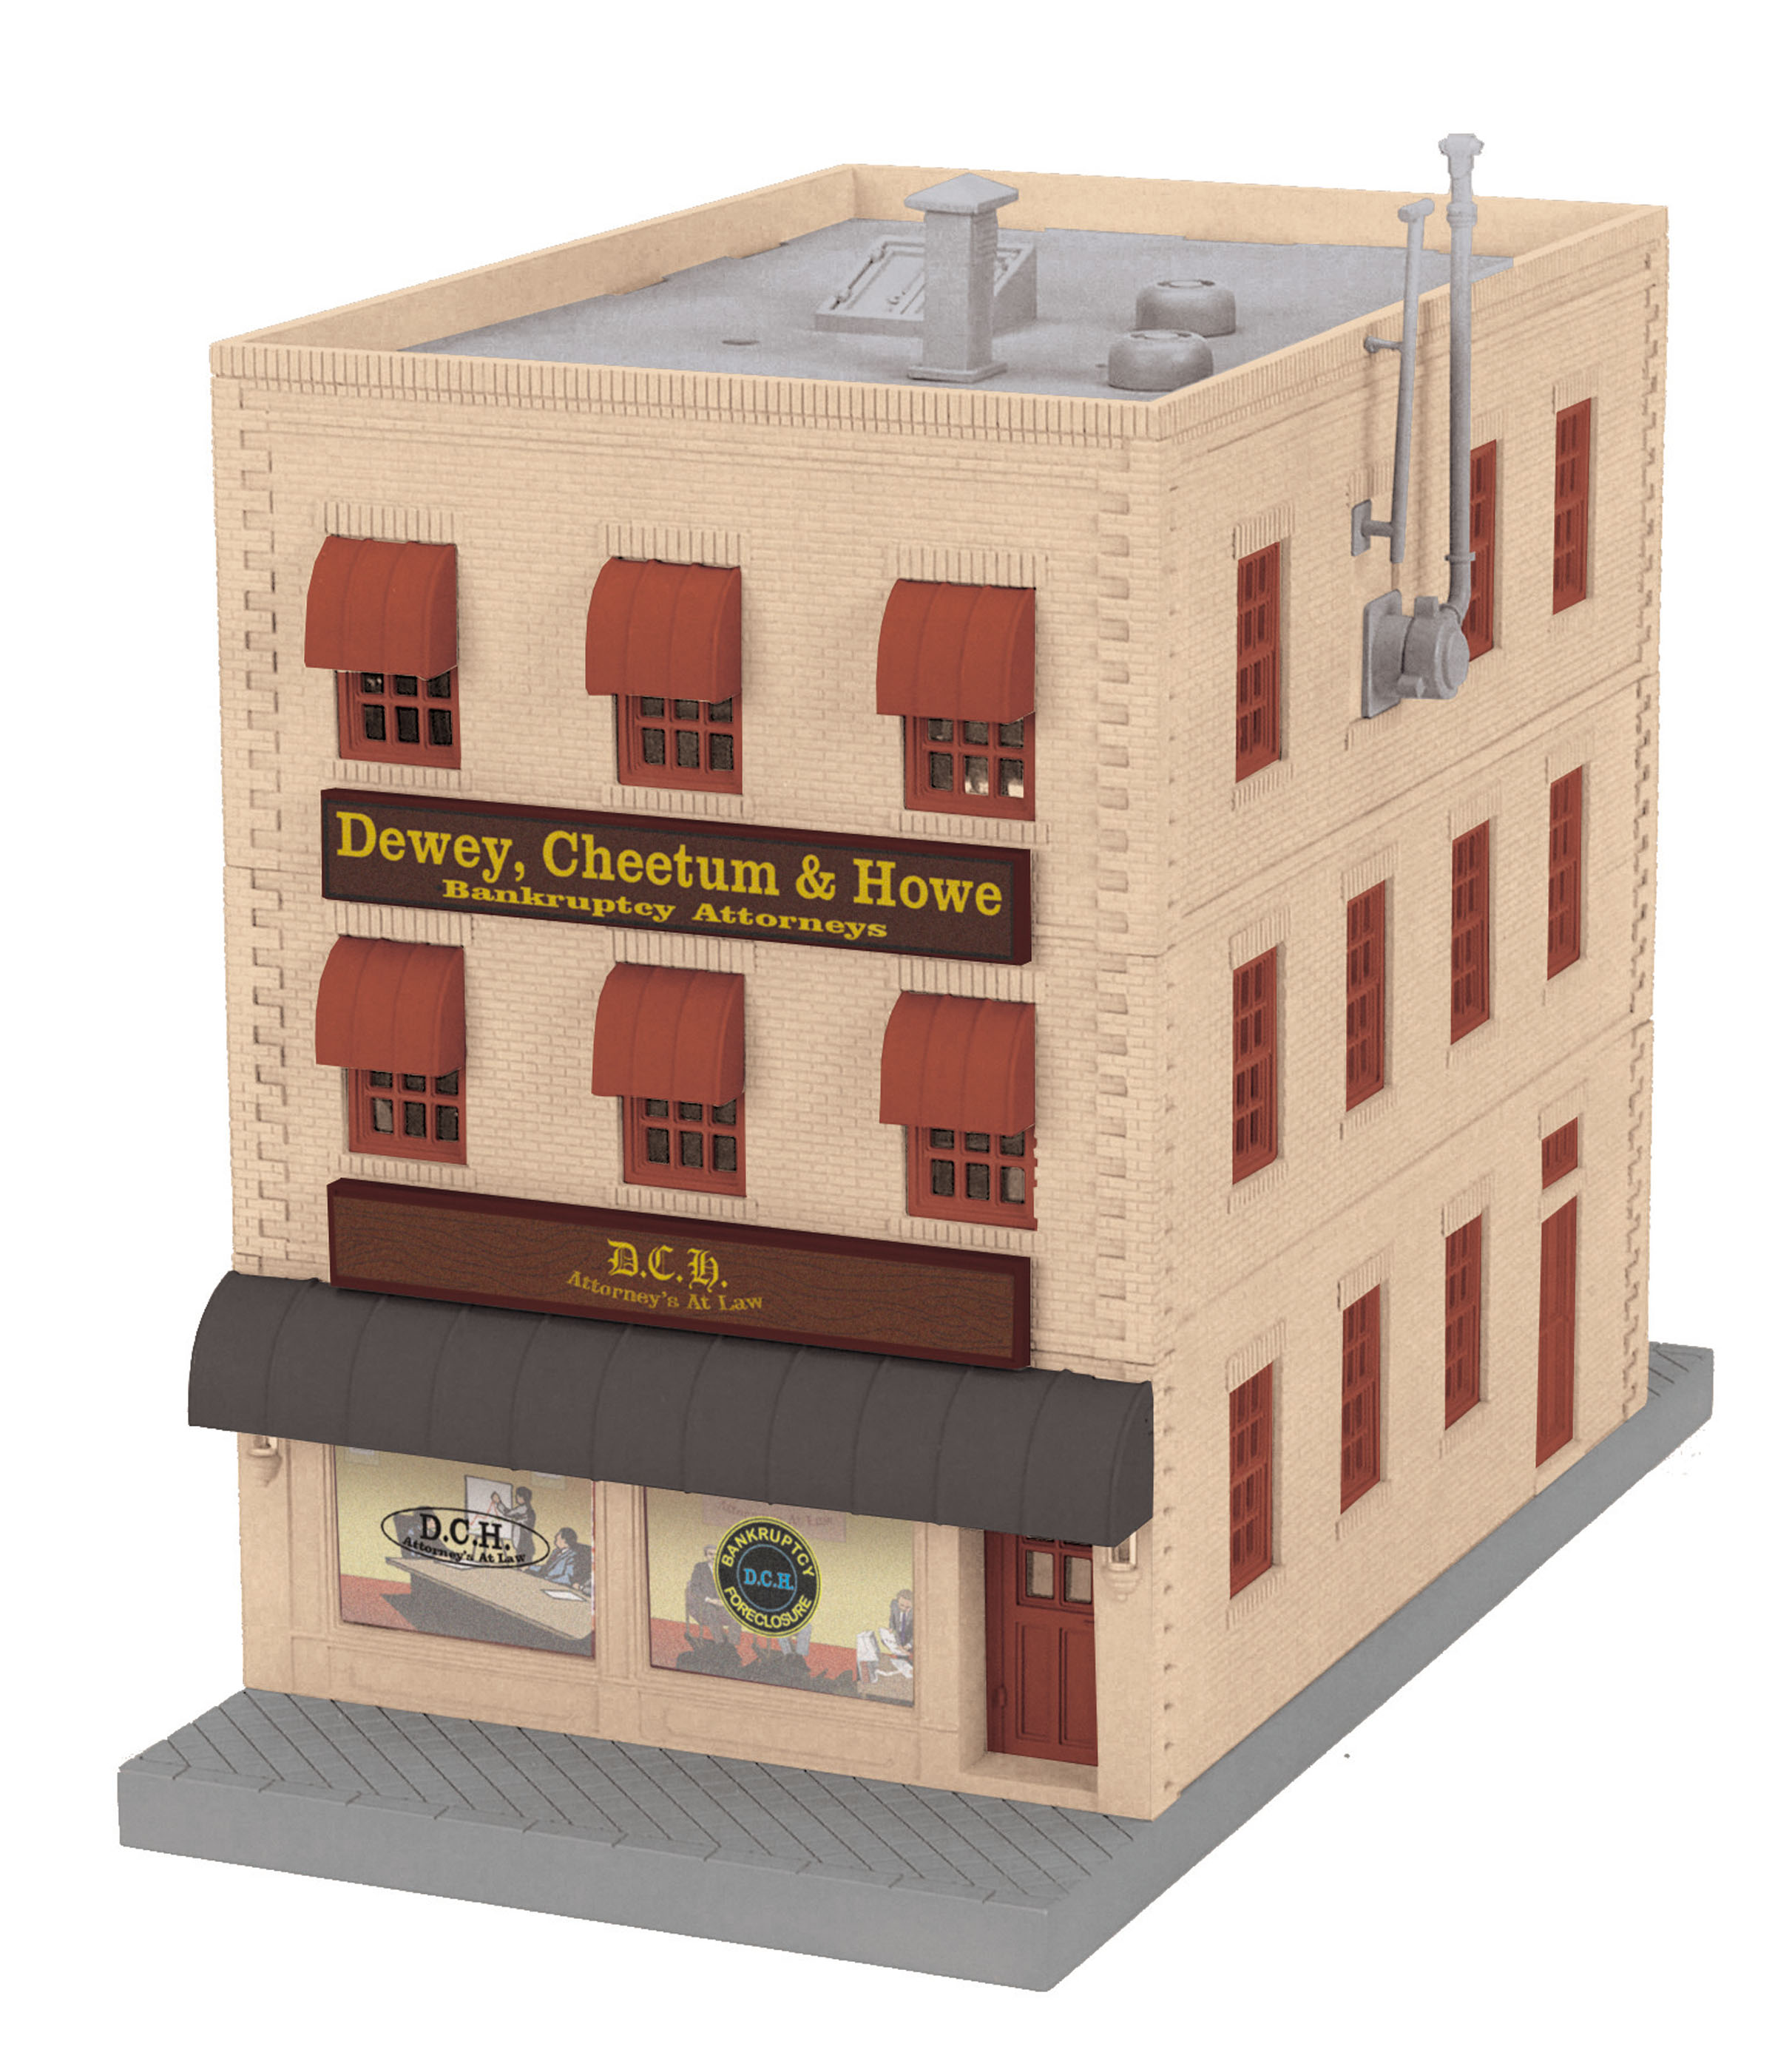 mth railking o scale buildings